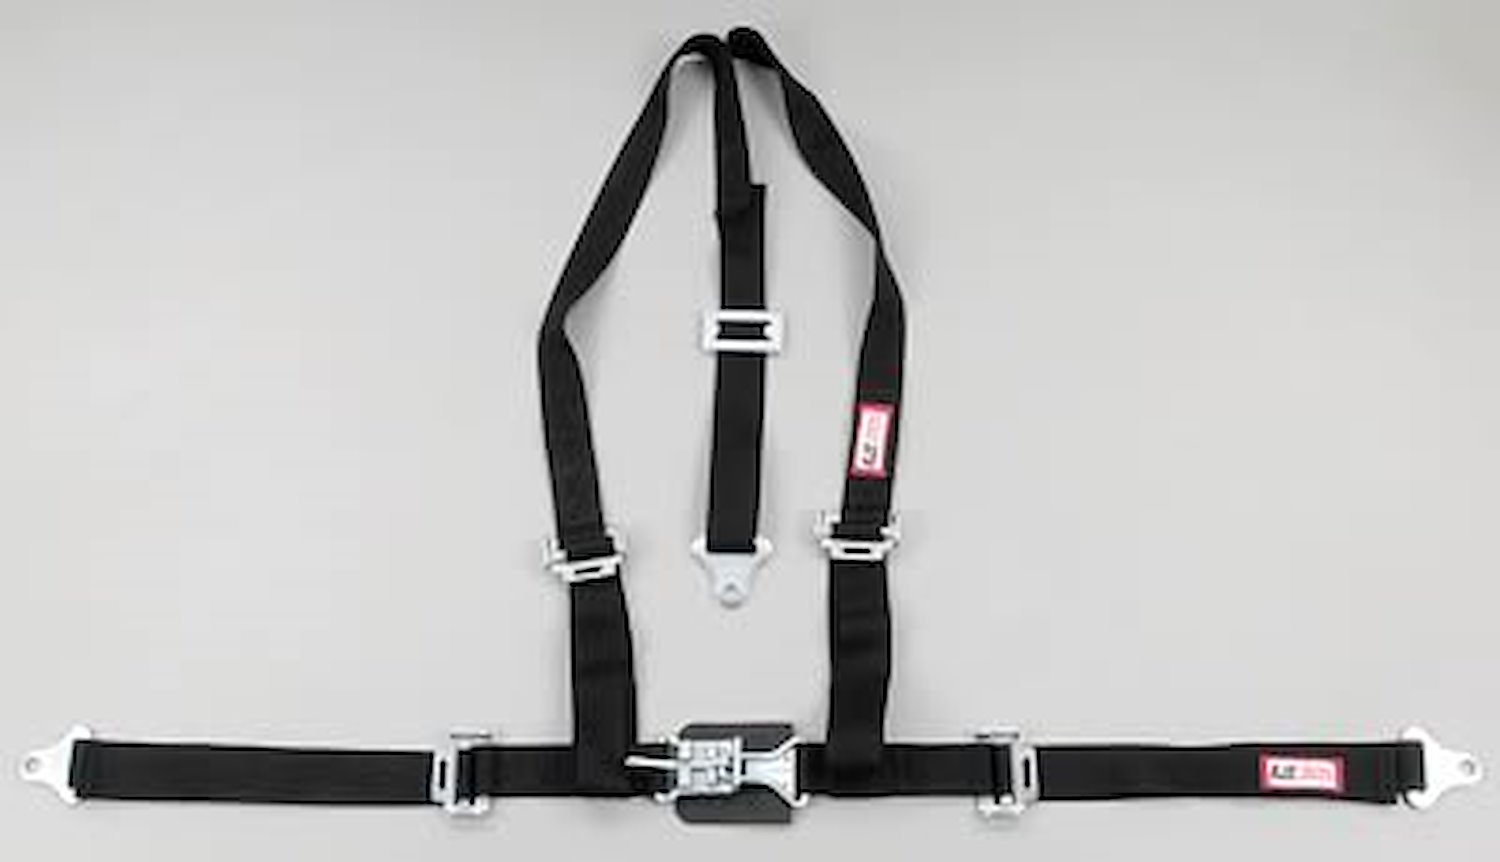 NON-SFI L&L HARNESS 3 PULL DOWN Lap Belt w/adjuster 2 S.H. Y FLOOR Mount ALL WRAP ENDS PURPLE